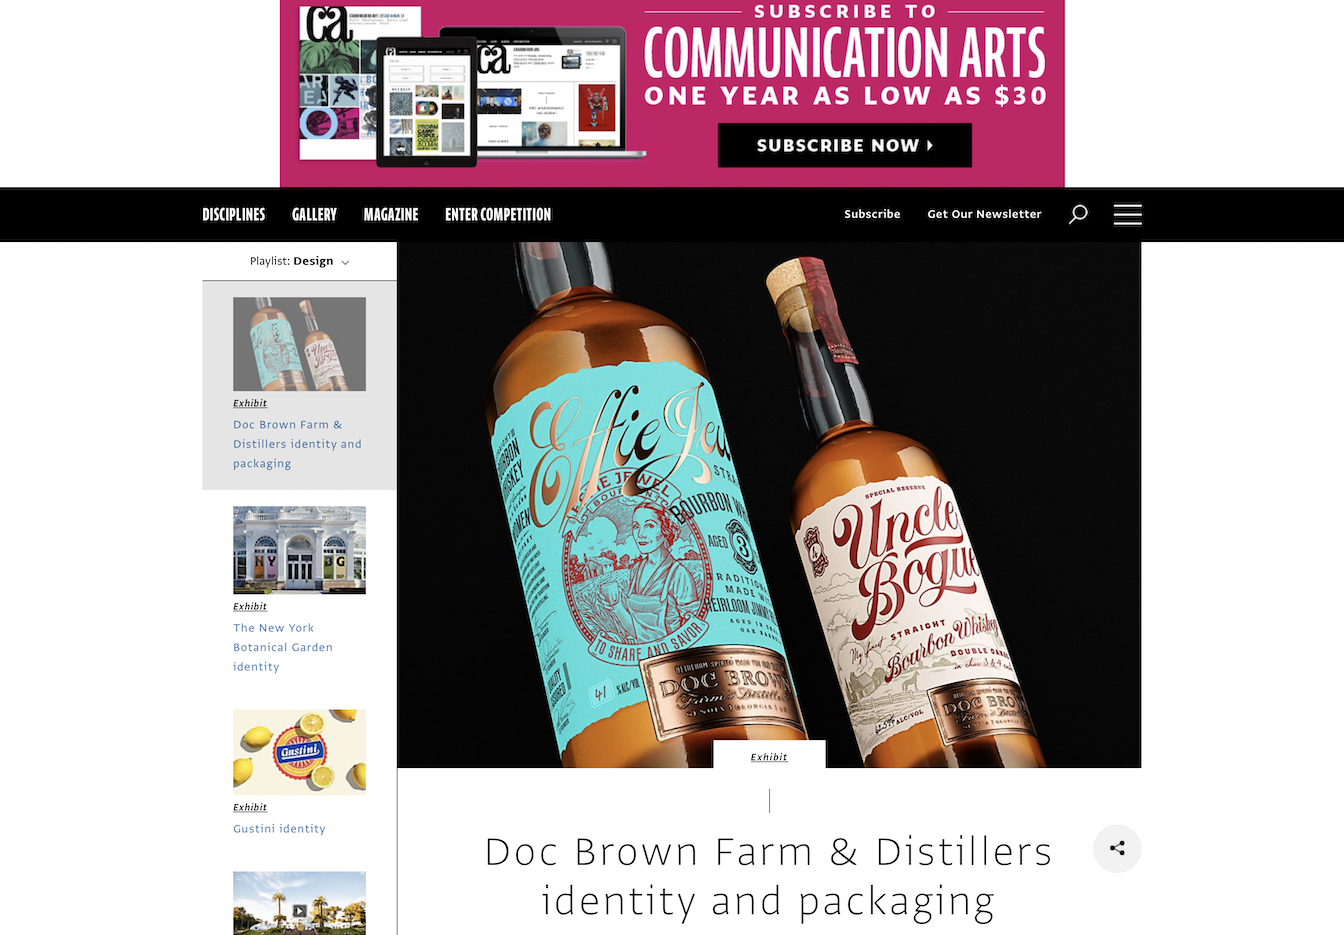 Doc Brown Farm & Distillers on the Communication Arts website